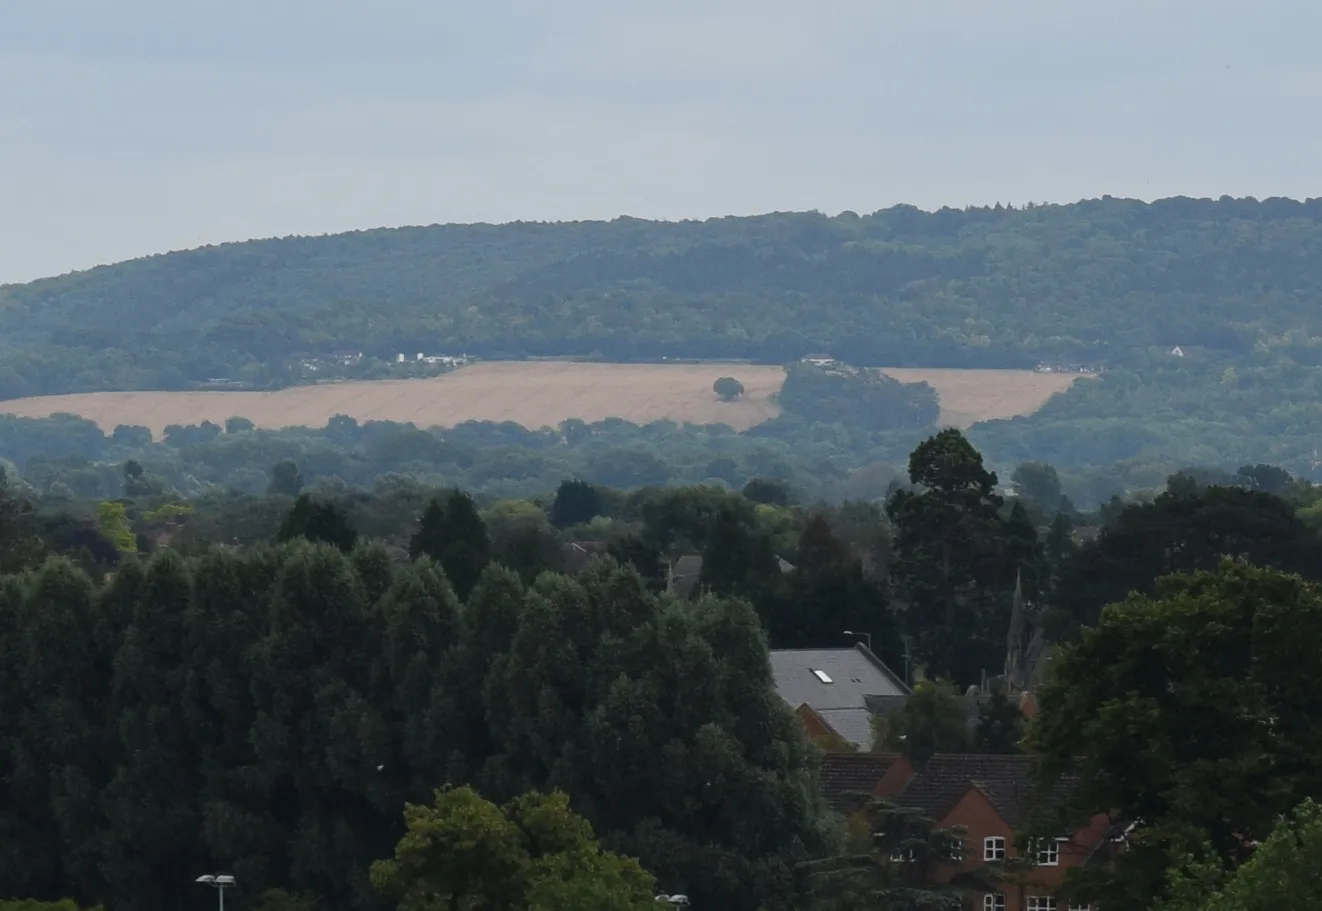 Nikkor 55-300mm Chiltern Hills seen from Aylesbury Telephone Exchange, 55mm, cropped